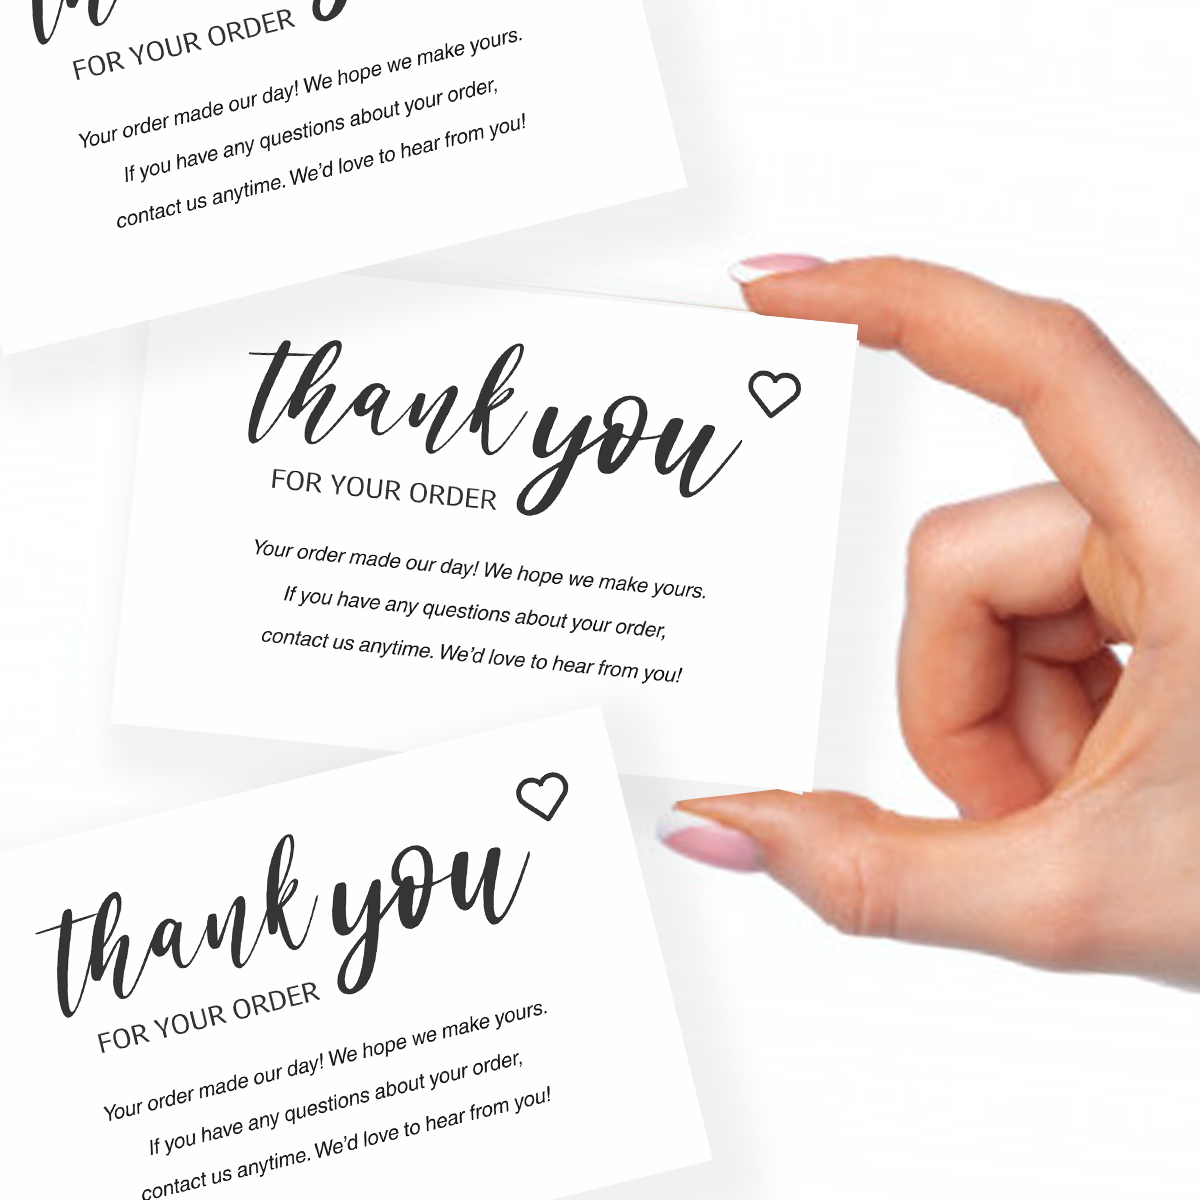 Bulk White Postcards Purchase Inserts to Support Small Business 6"x 4" 50 (Pack of 50)